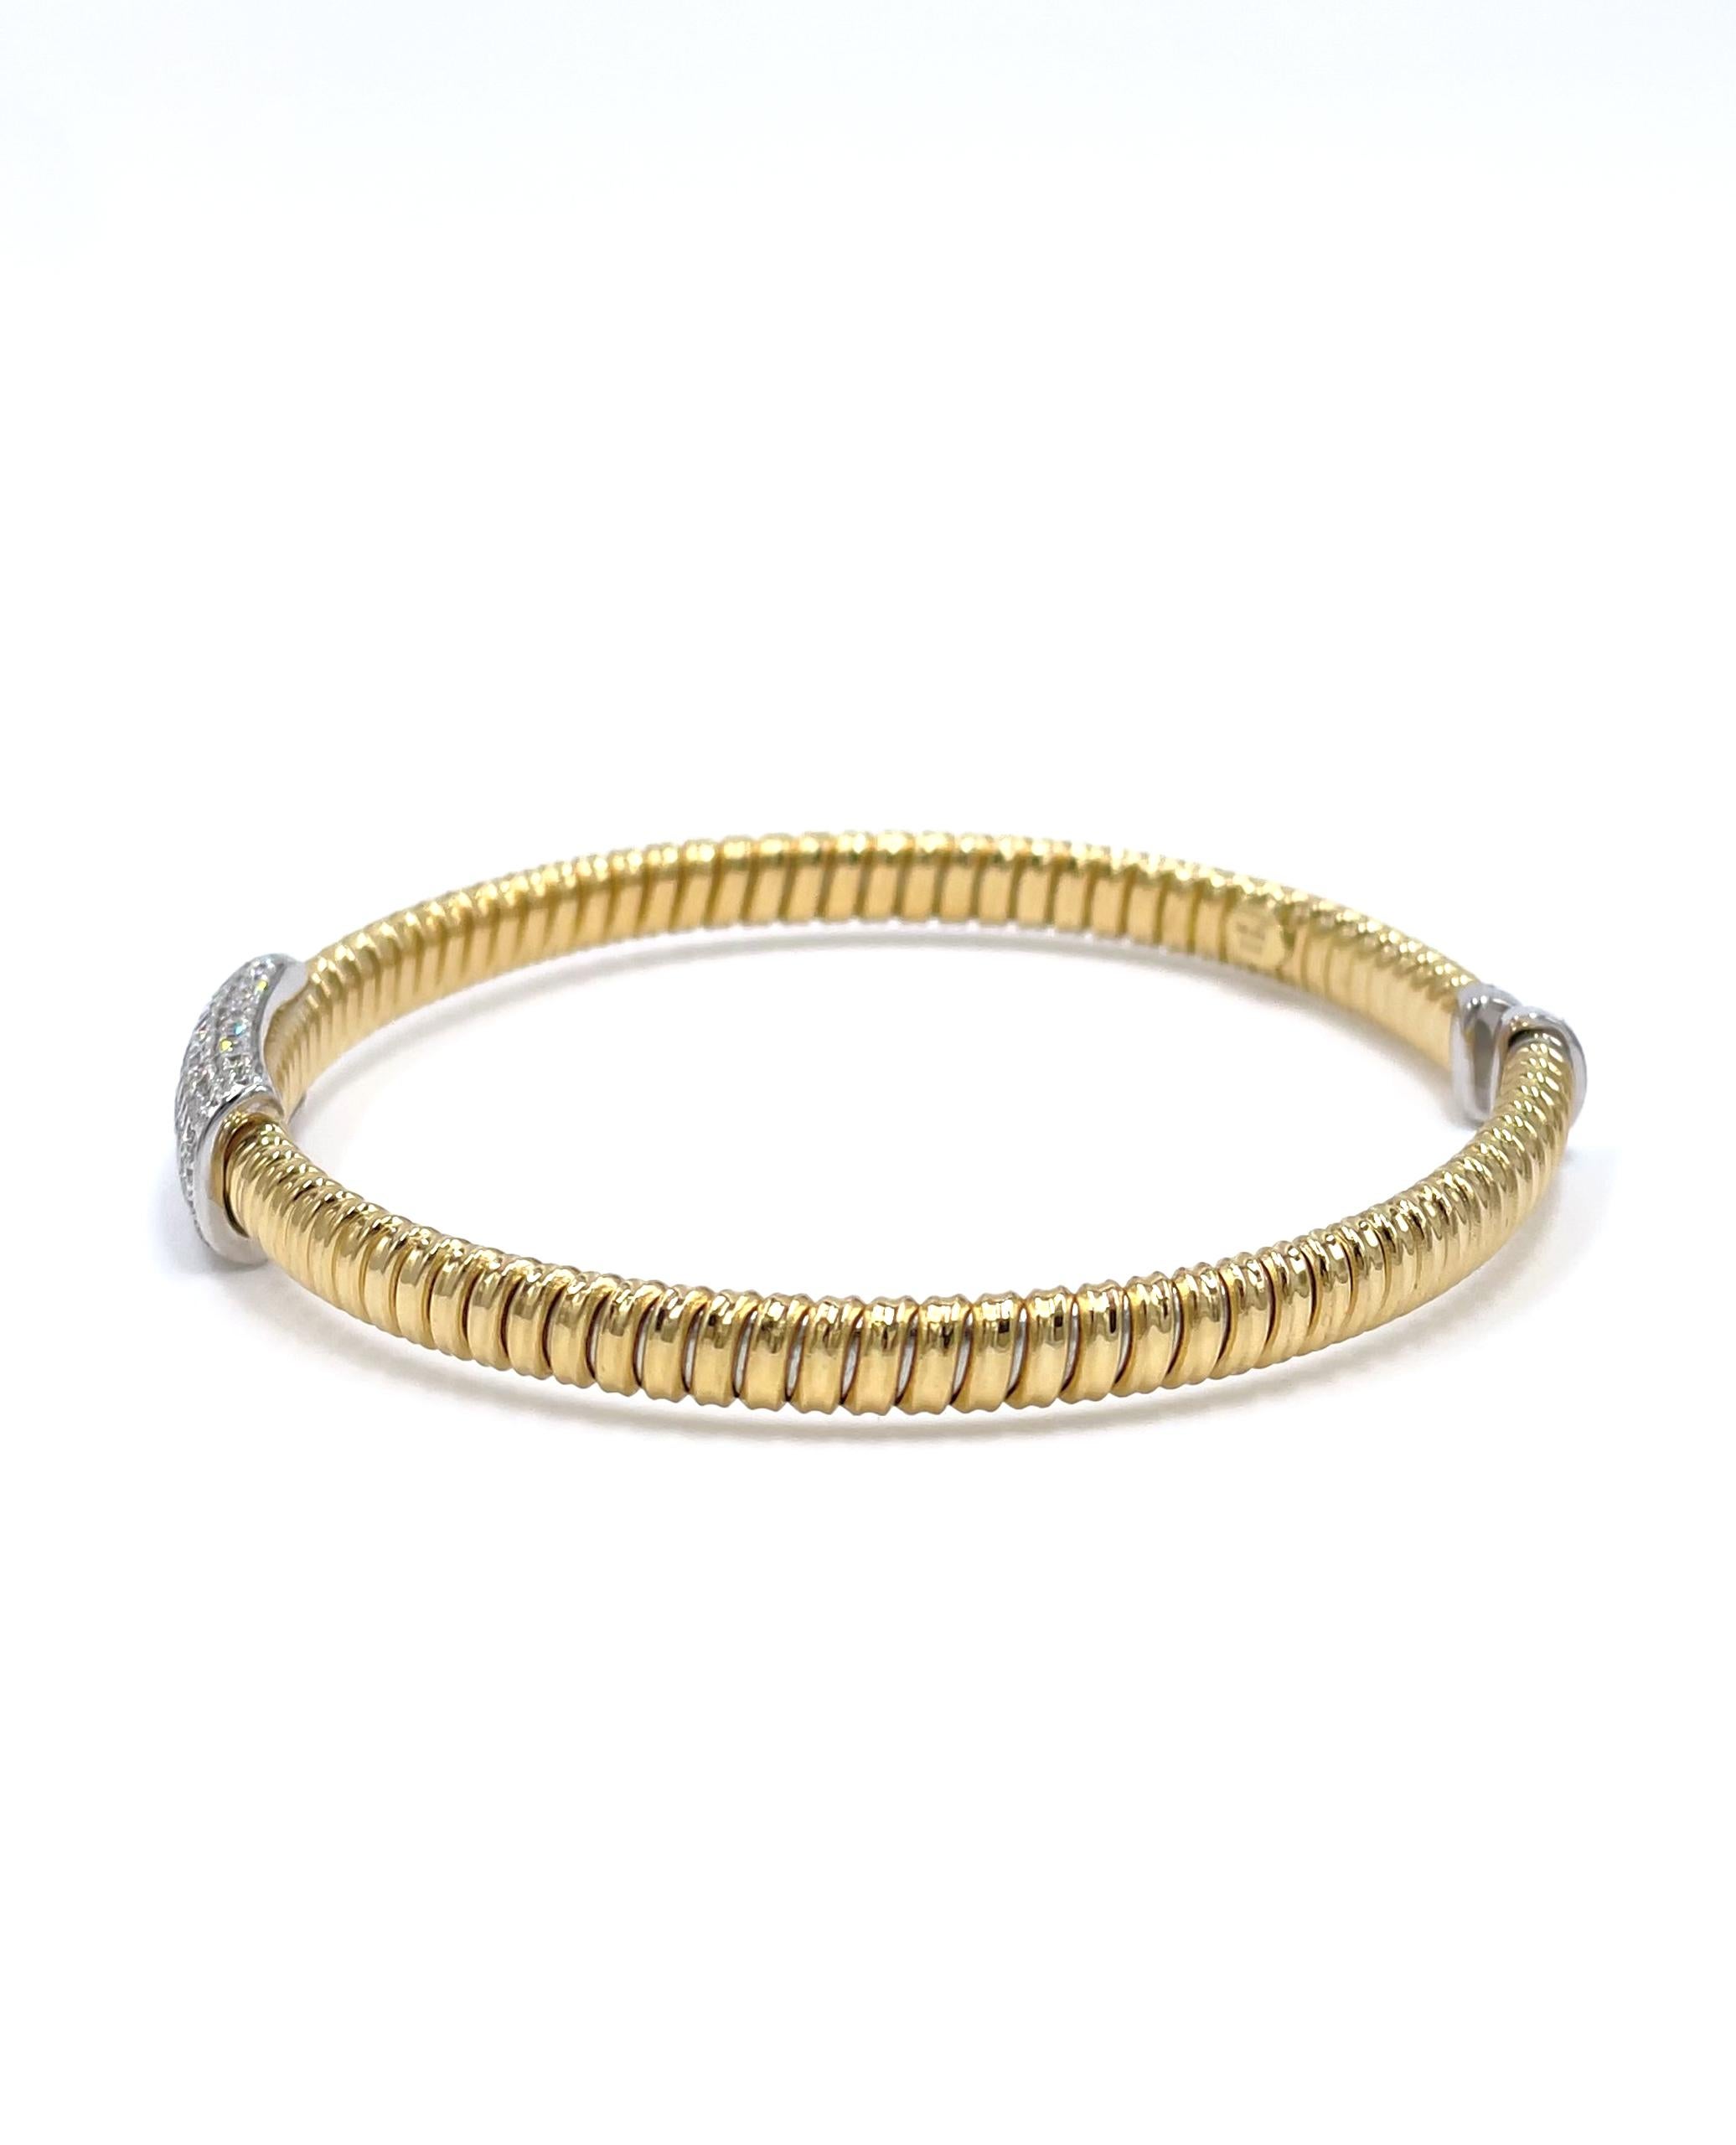 18K yellow and white gold open bangle with ribbed detail and round brilliant-cut pave set diamonds weighing 0.87 carats total: G color, VS2/SI1 clarity.

- Can accommodate 6.5-7.5 inch wrist